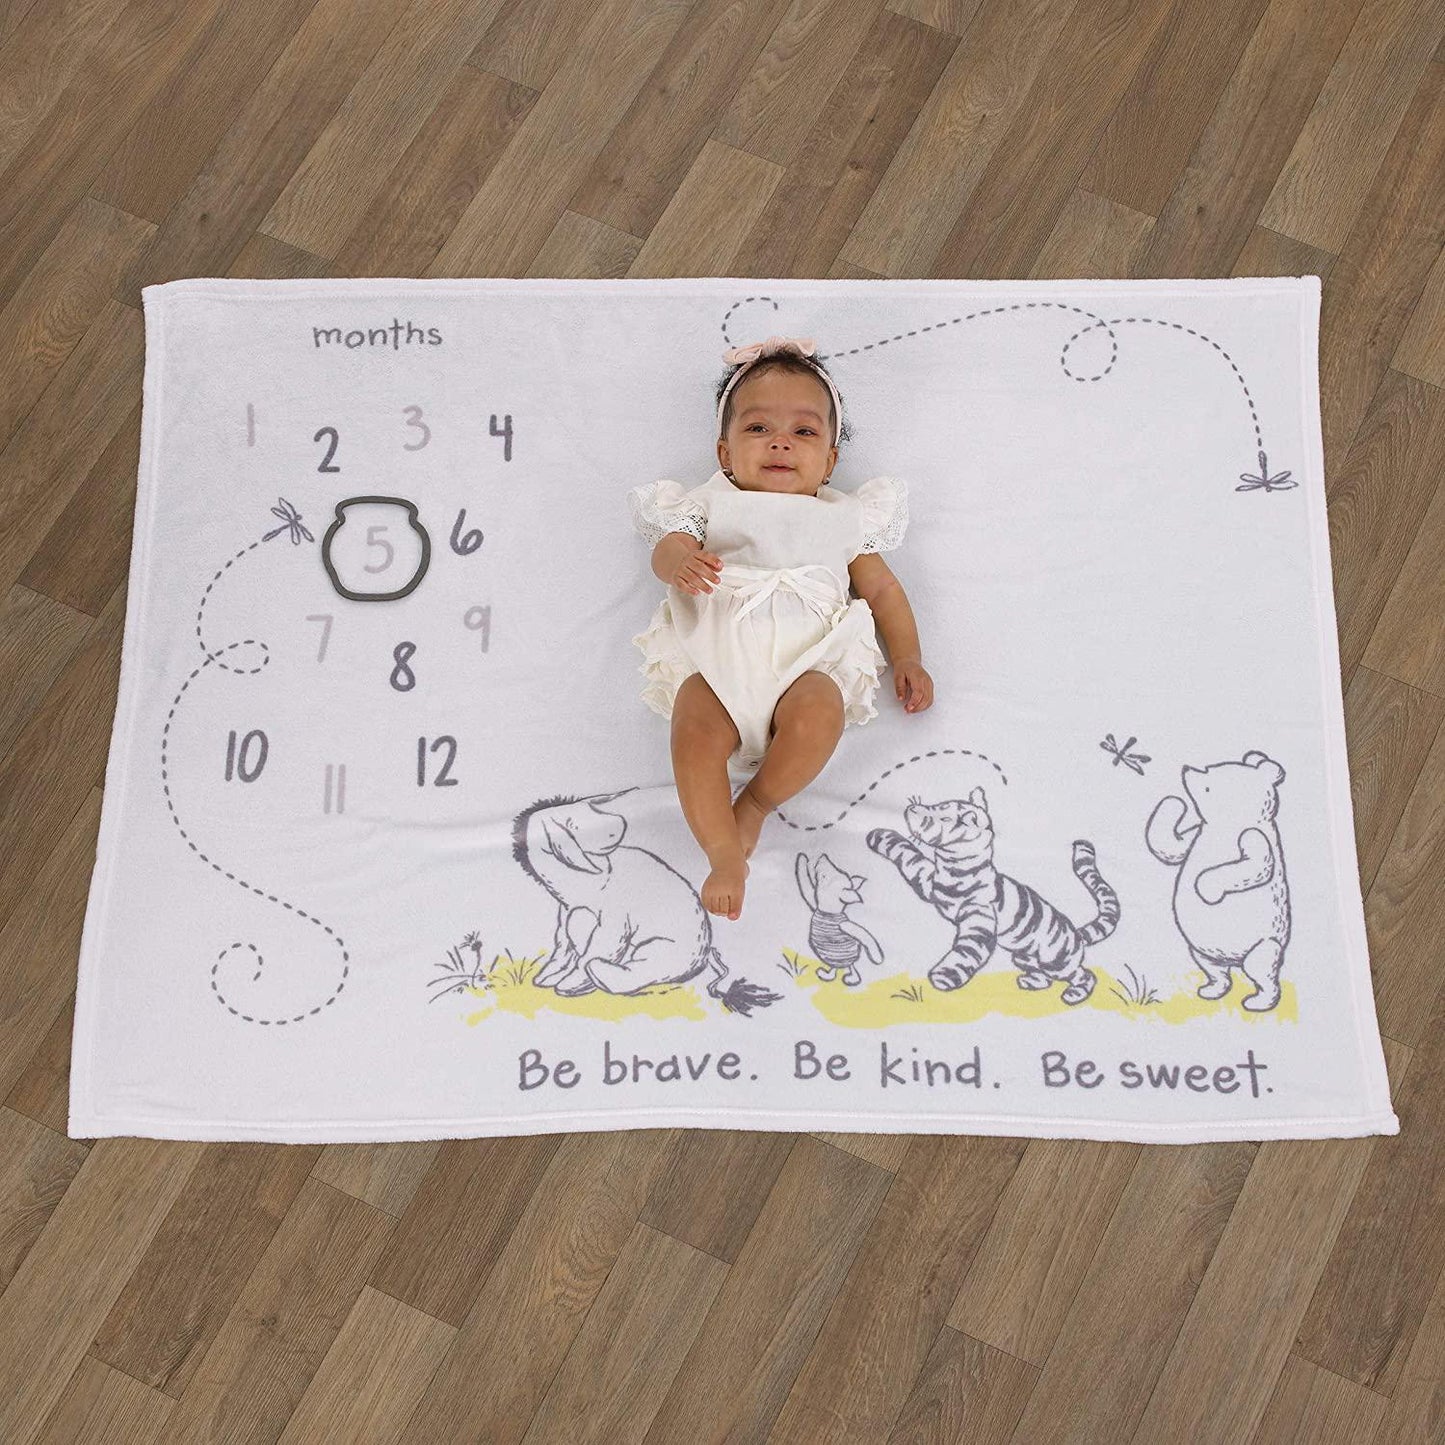 Disney Classic Winnie The Pooh, White, Grey and Lime Super Soft Milestone Baby Blanket, White, Grey, Lime, Charcoal